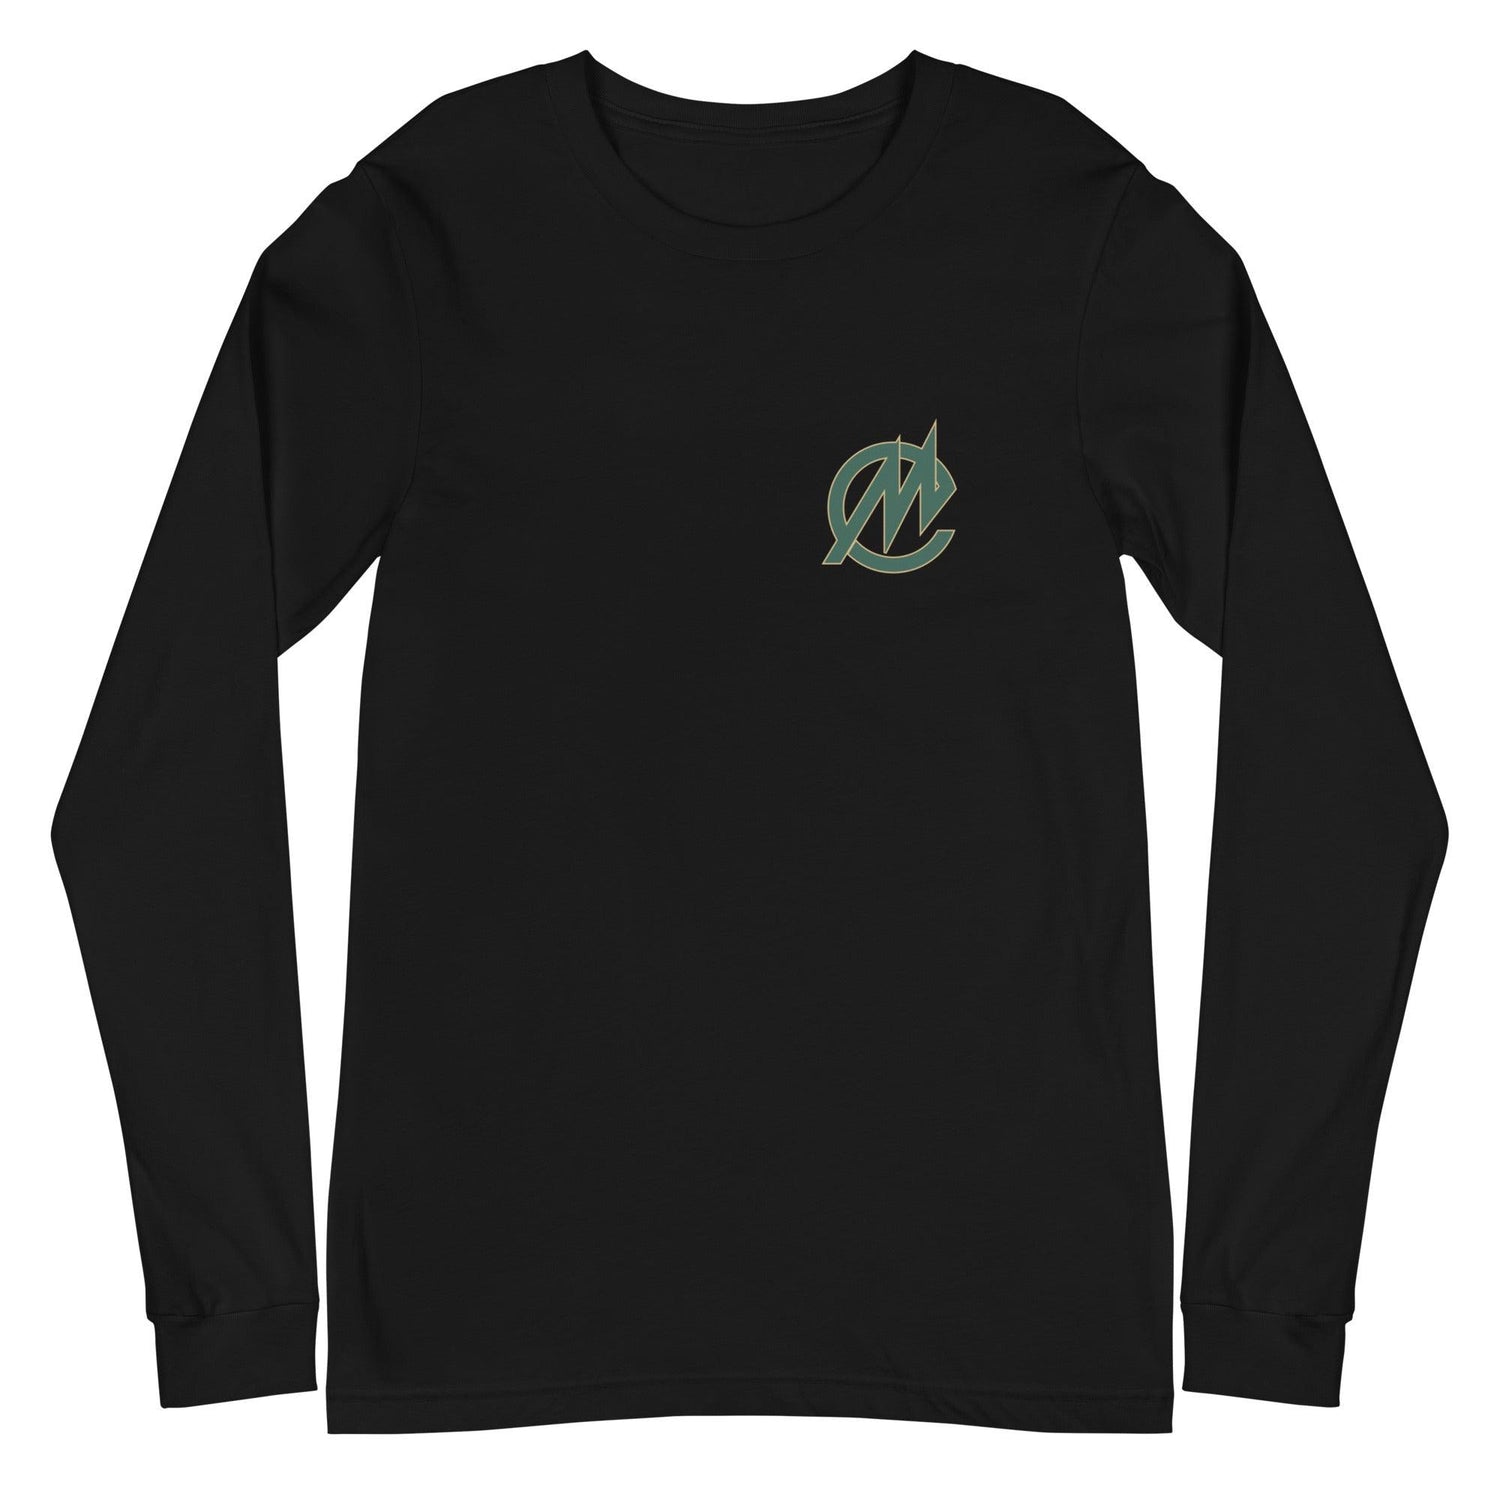 Chase Monroe "Essential" Long Sleeve Tee - Fan Arch